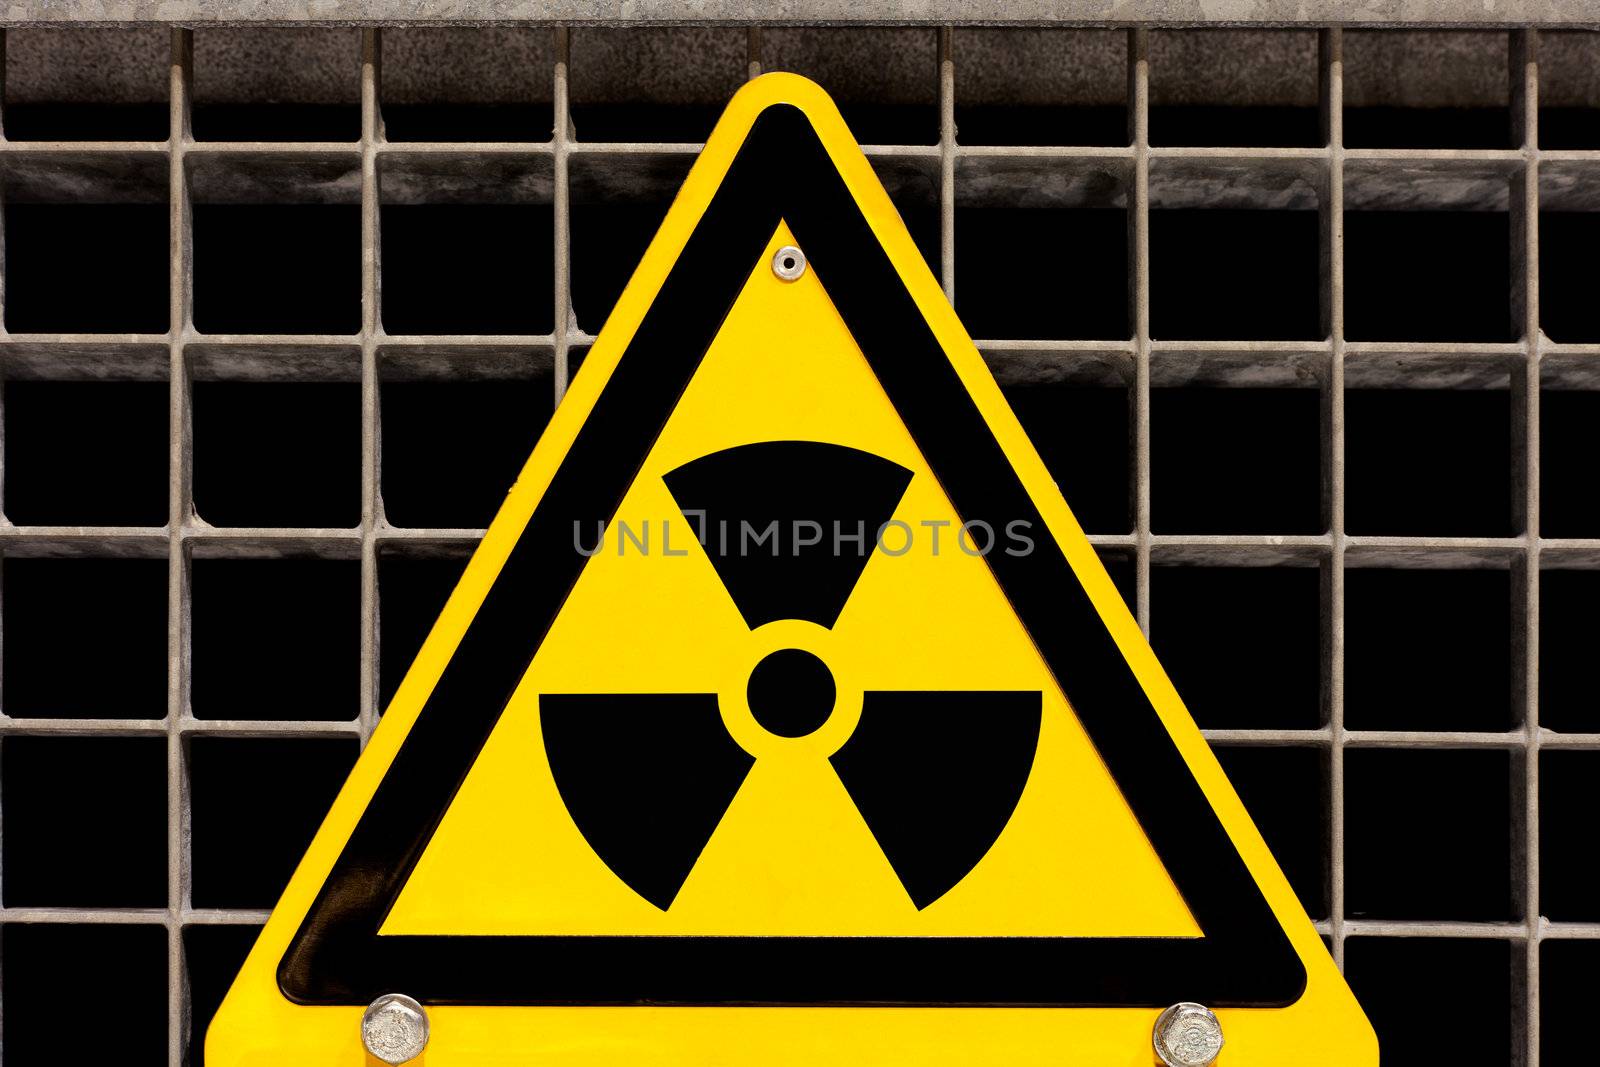 Nuclear radiation warning sign bolted to steel grid